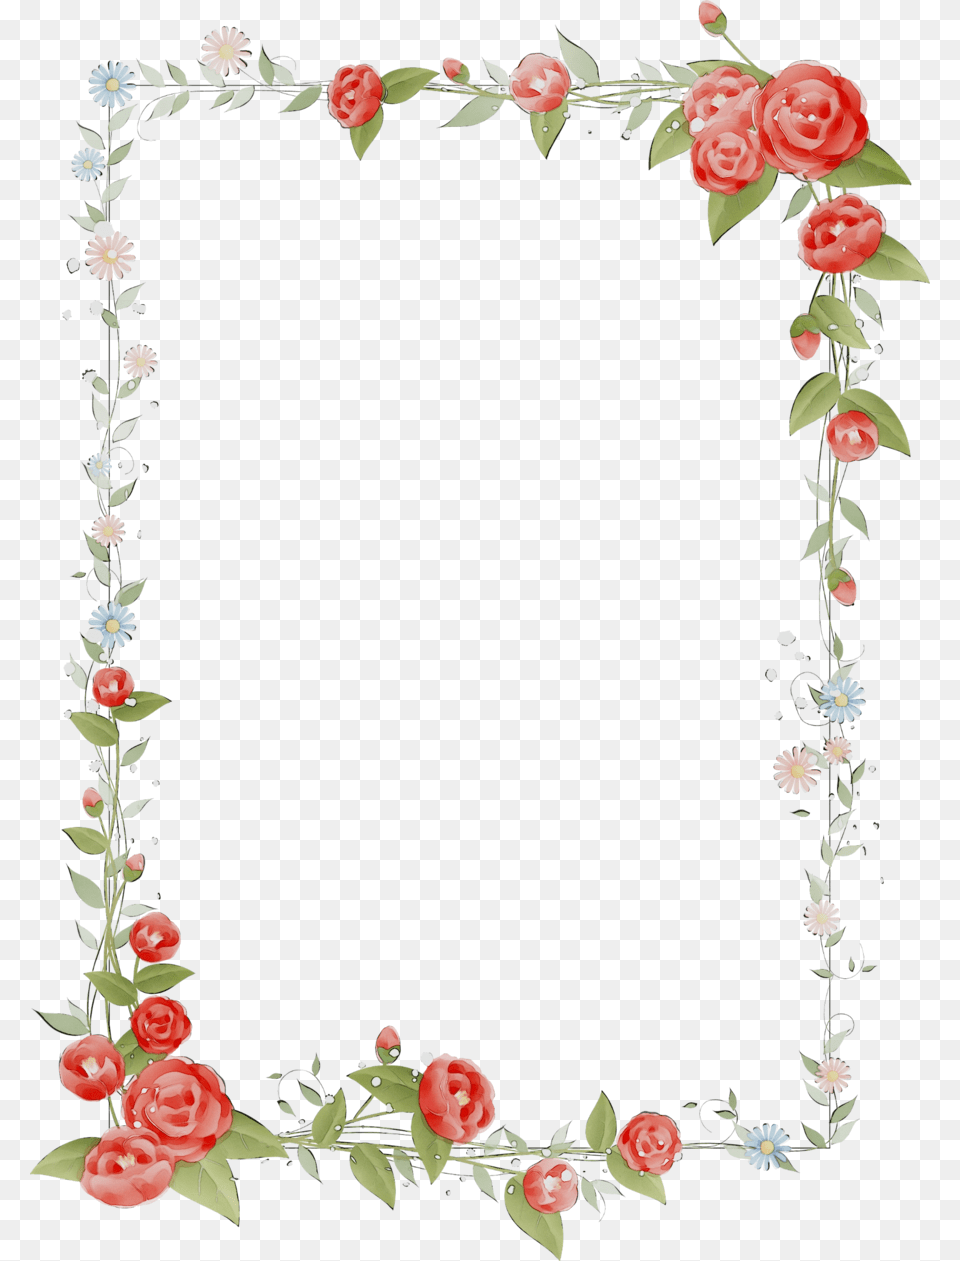 Hearts And Flowers Border Clipart Background Design For Microsoft Word, Art, Floral Design, Flower, Graphics Free Png Download